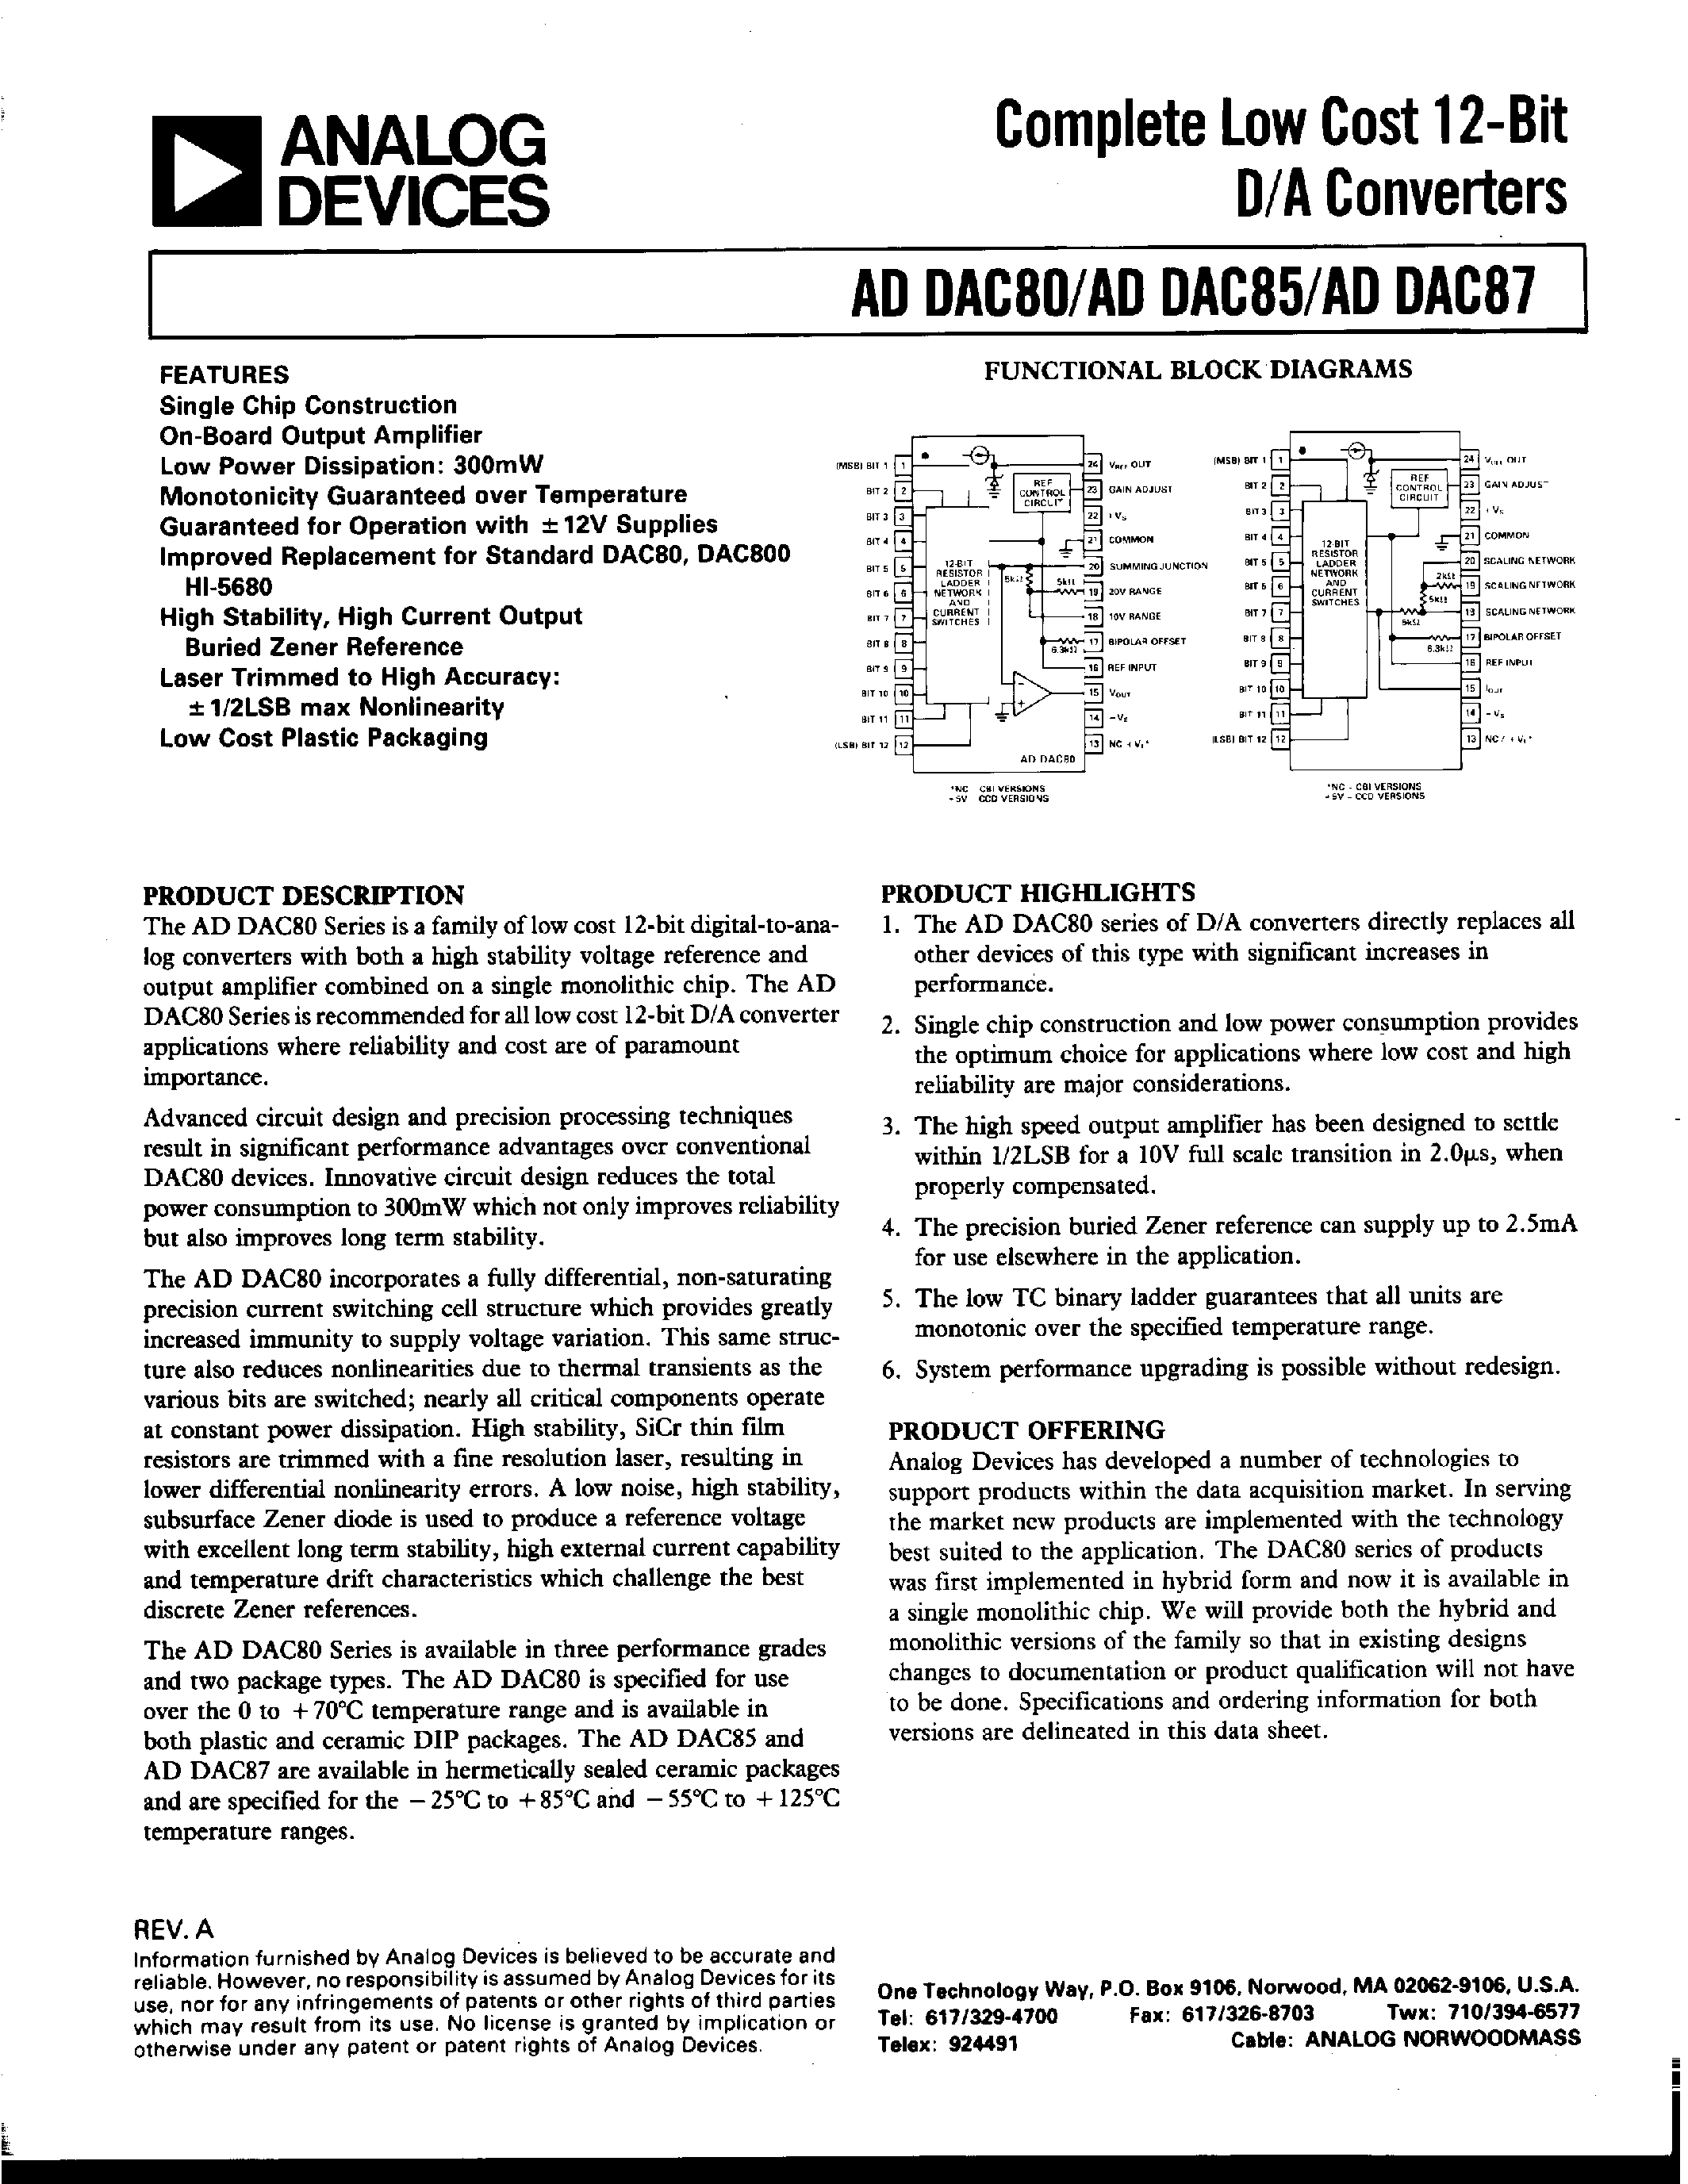 Datasheet ADDAC80-CBI-V - COMPLETE LOW COST 12-BIT D/A CONVERTERS page 1